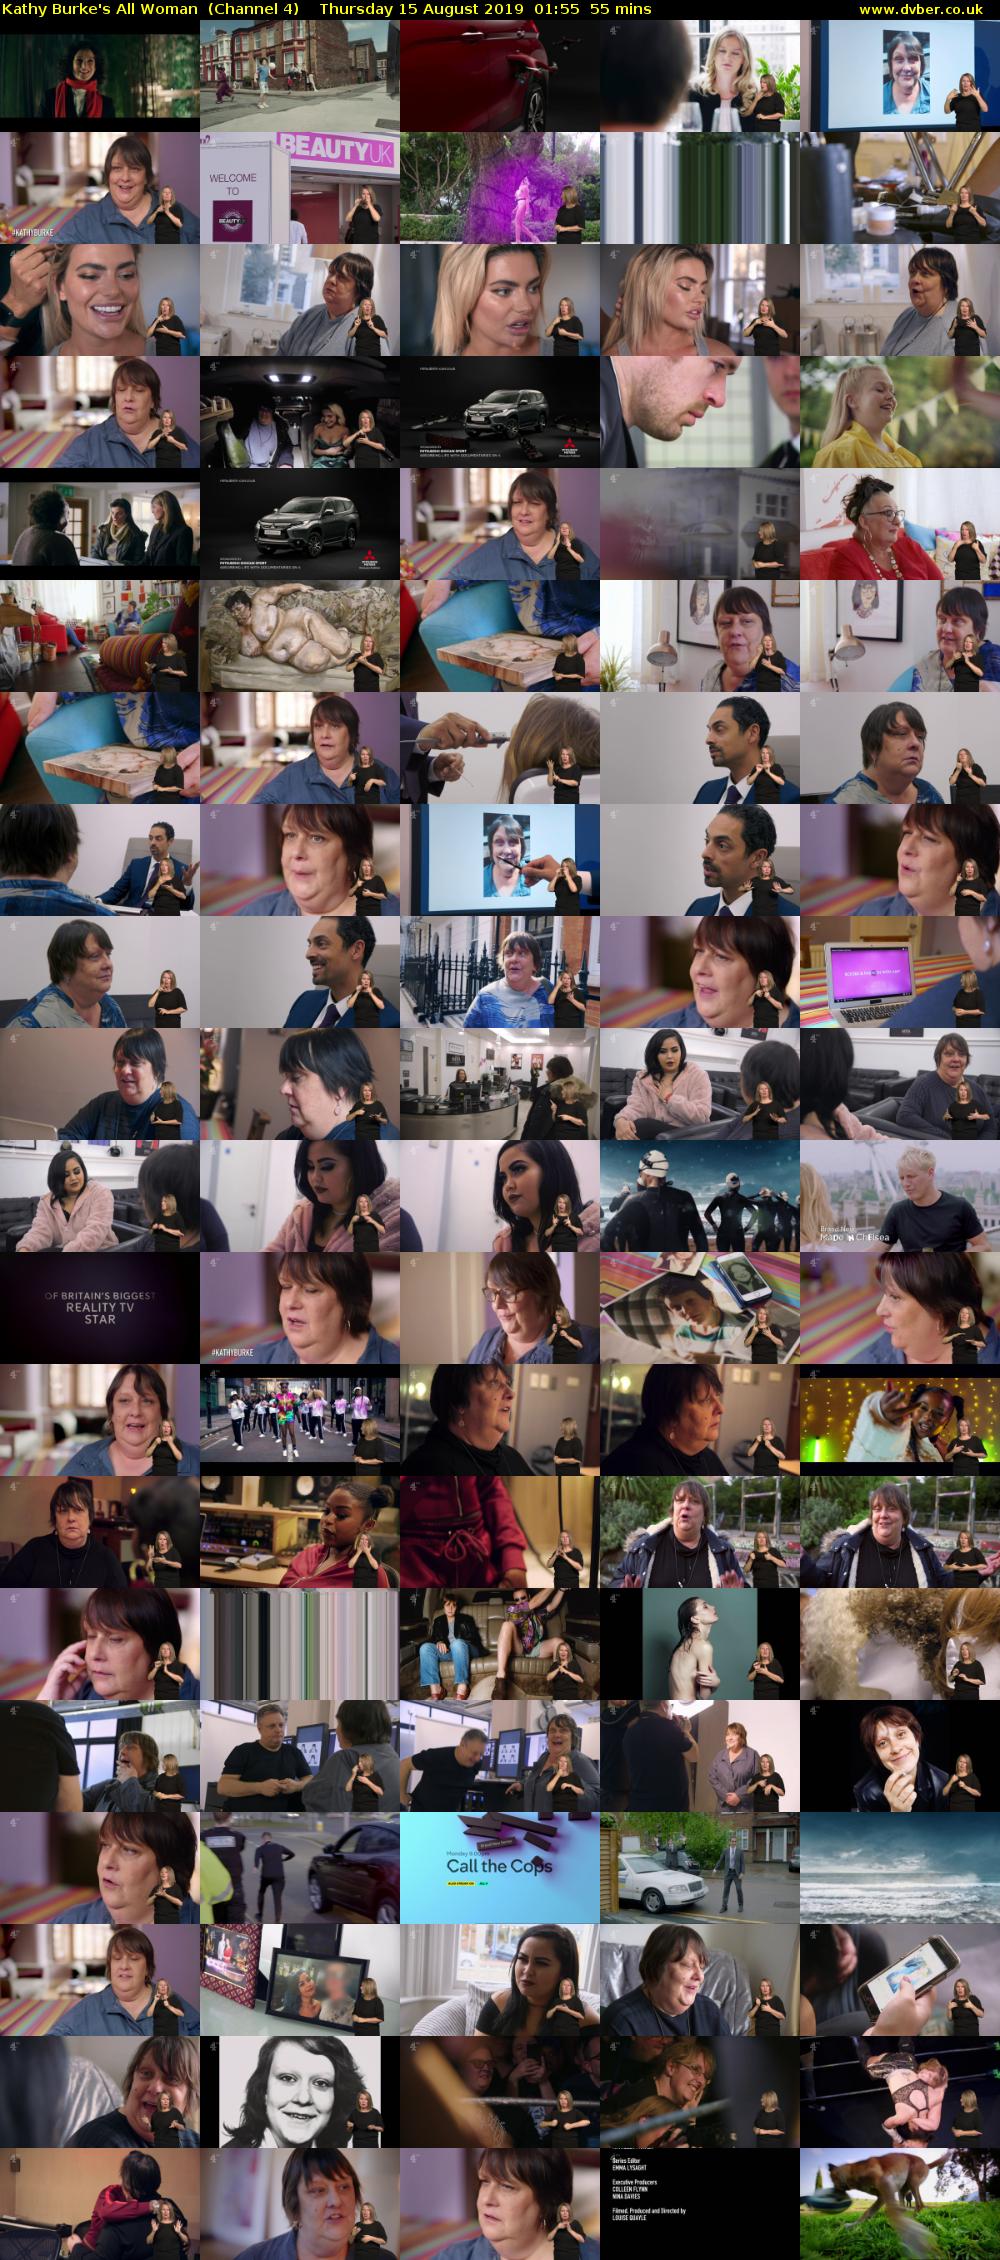 Kathy Burke's All Woman  (Channel 4) Thursday 15 August 2019 01:55 - 02:50